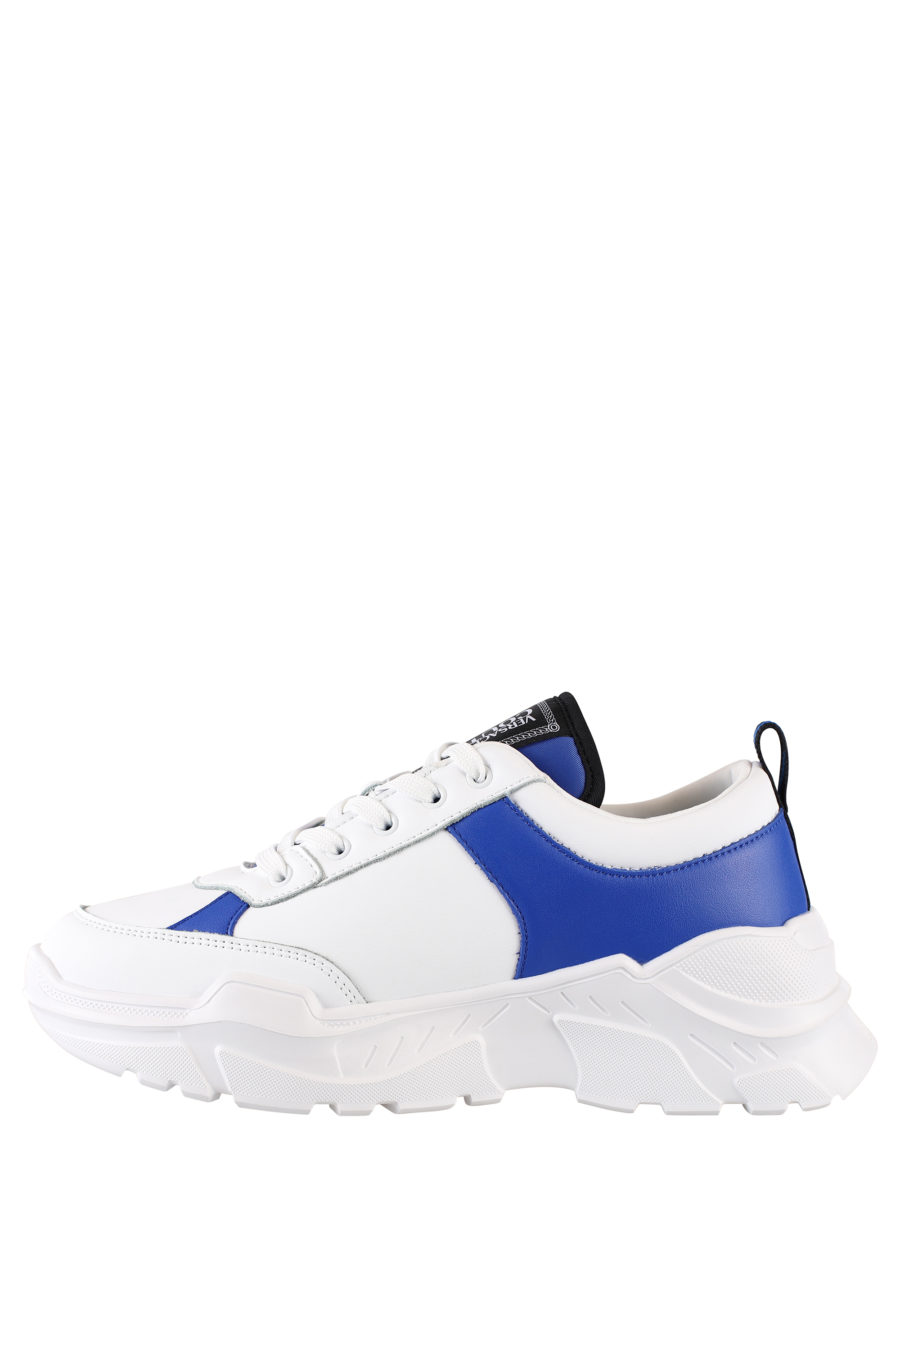 White and blue "Speedtrack" shoes - IMG 1939